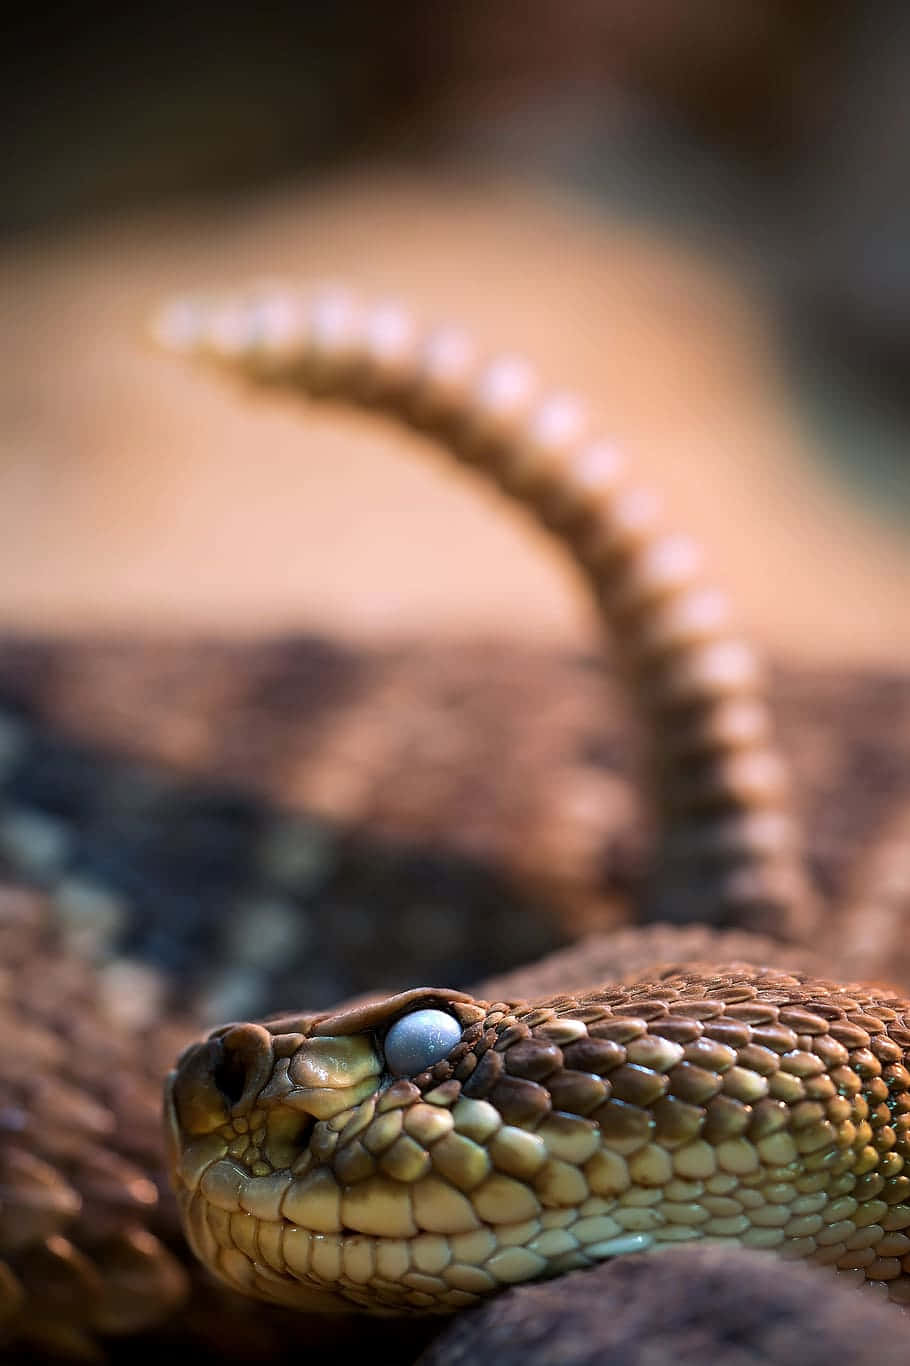 Close-up of a Brown Snake camouflaged in nature Wallpaper